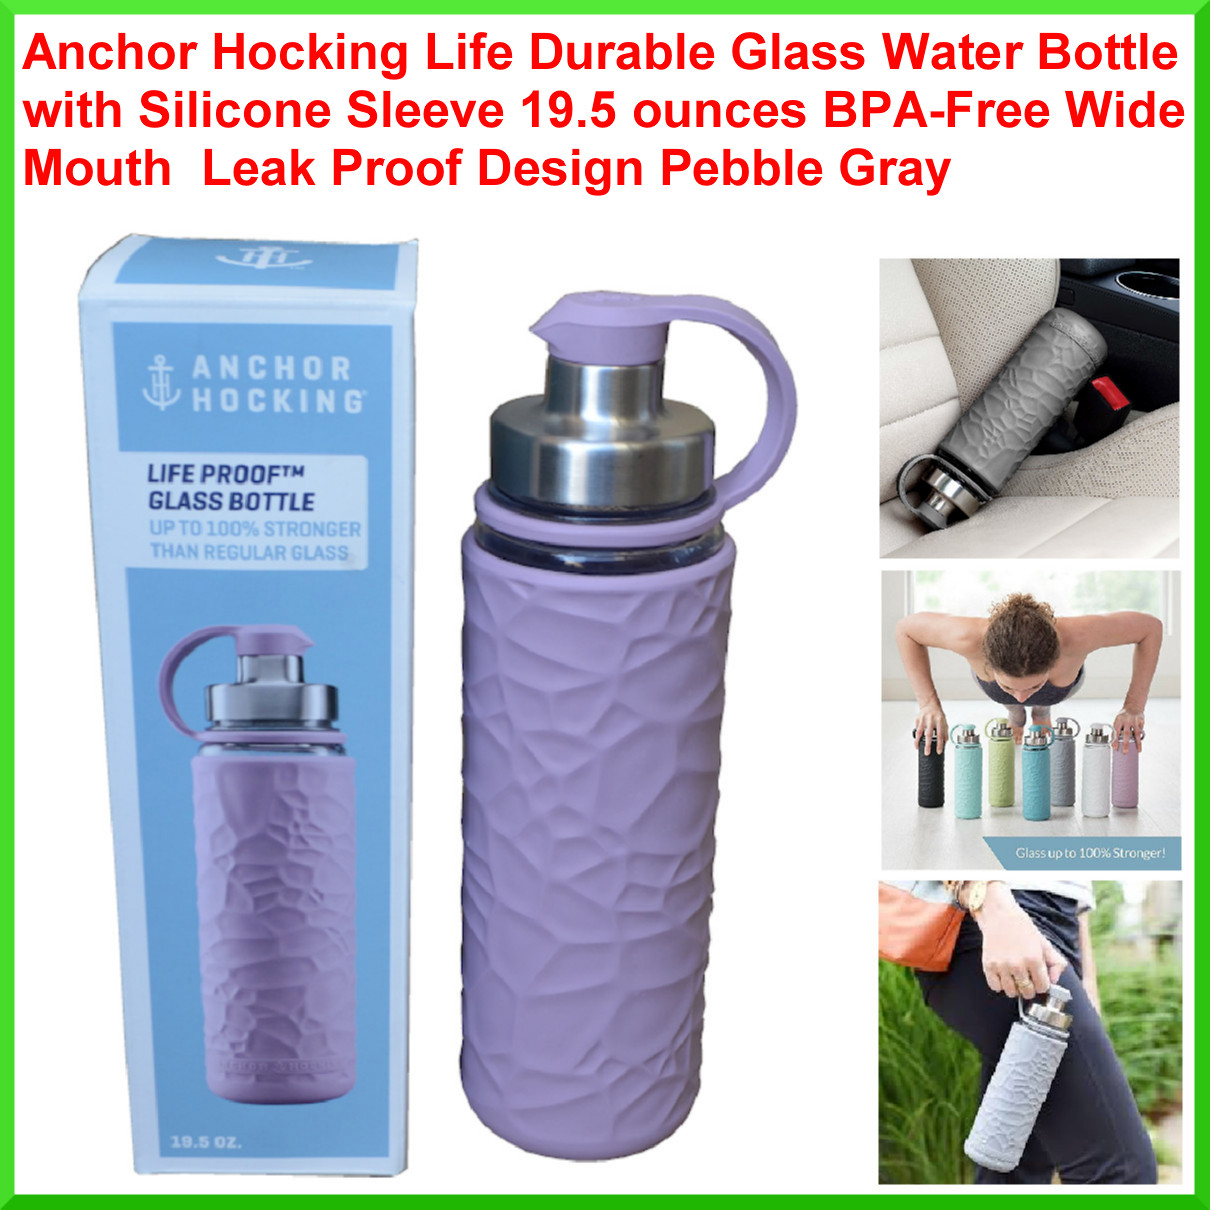 Anchor Hocking Life Durable Glass Water Bottle with Silicone 